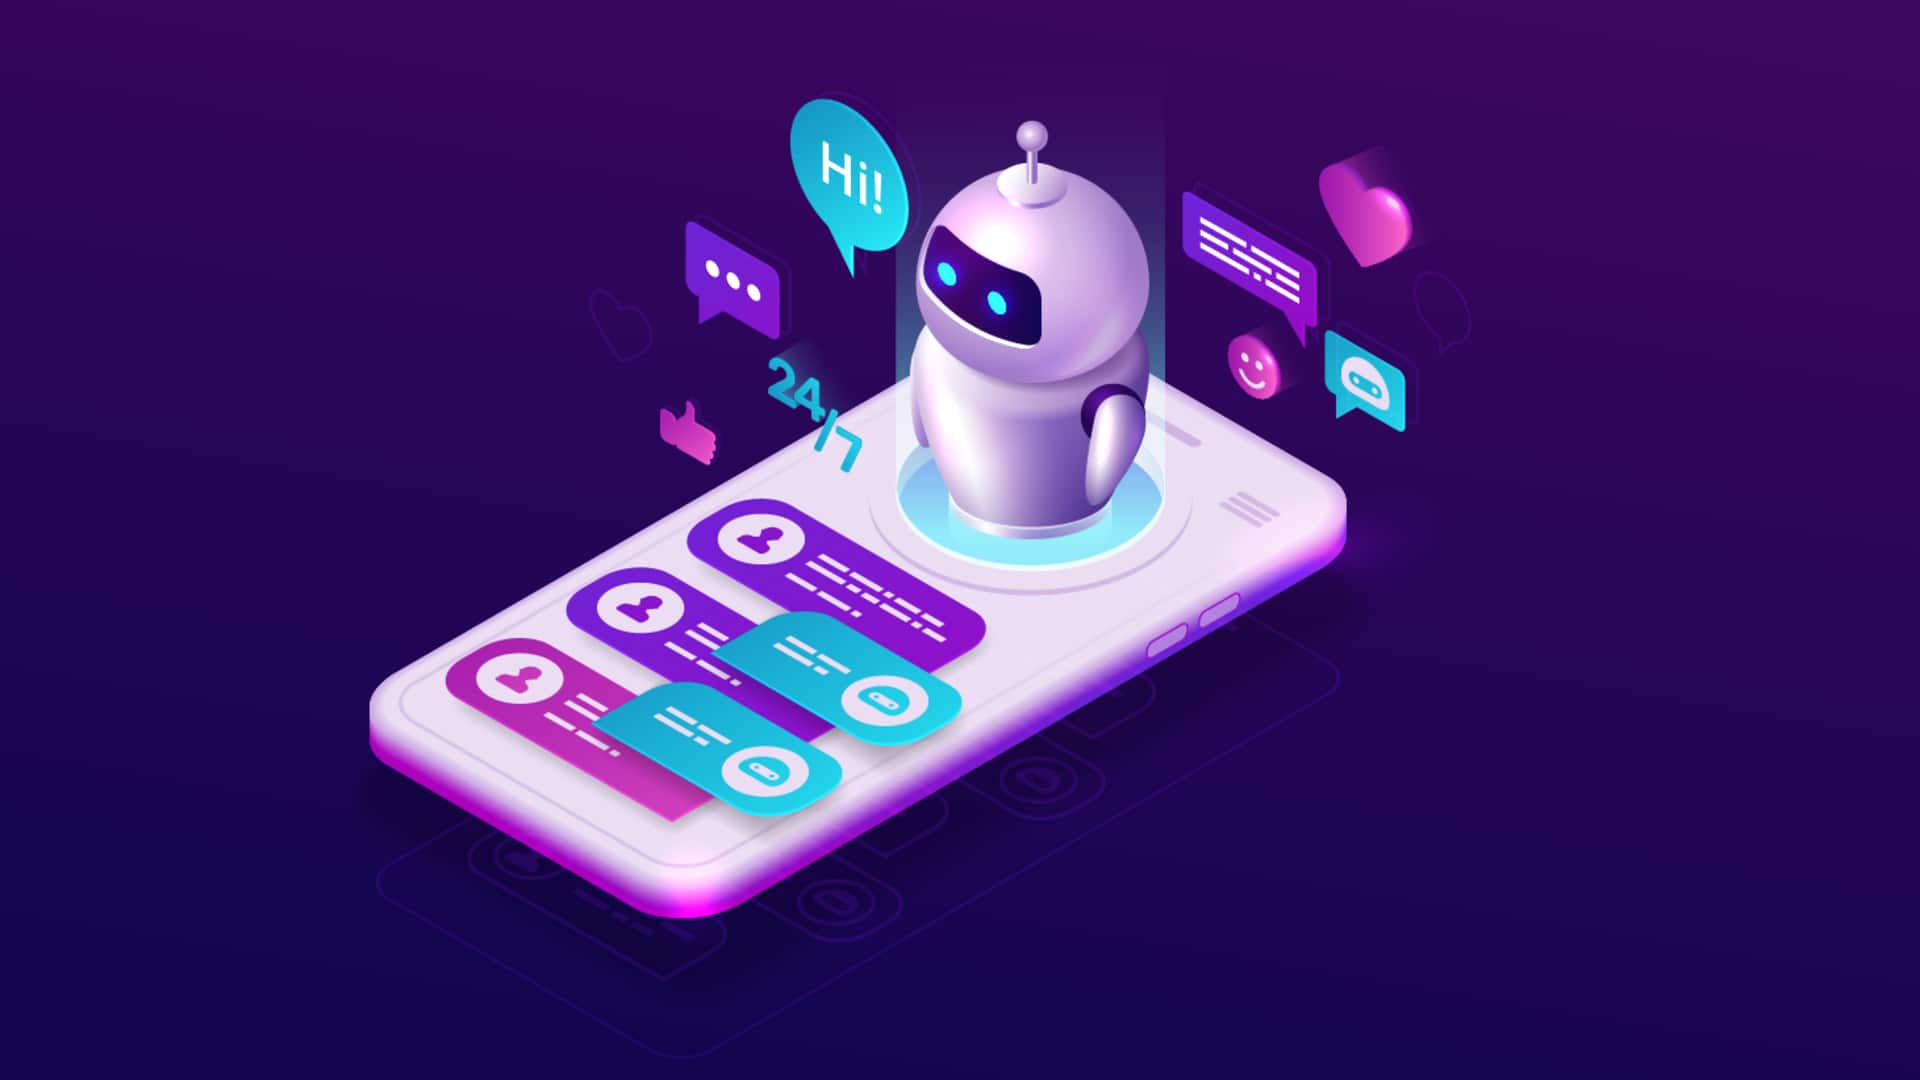 Jio Haptik launches Contakt, an AI tool to create chatbots